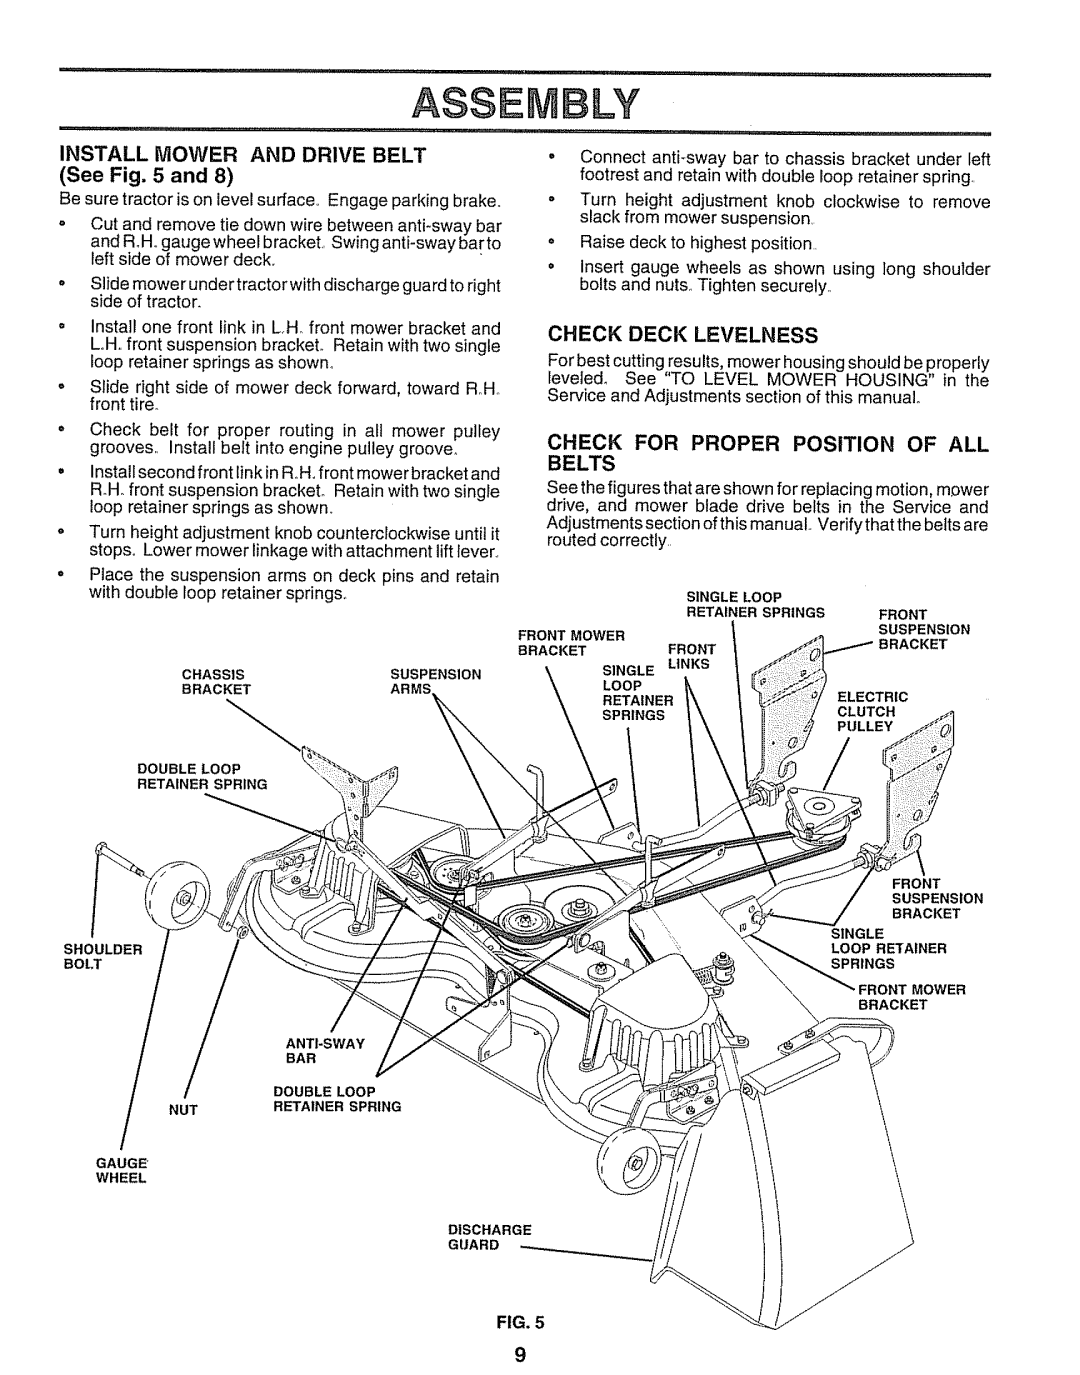 Sears 917.25597 owner manual Assembly, INSTALL MOWER AND DRIVE BELT See and, Check Deck Levelness, Fig 